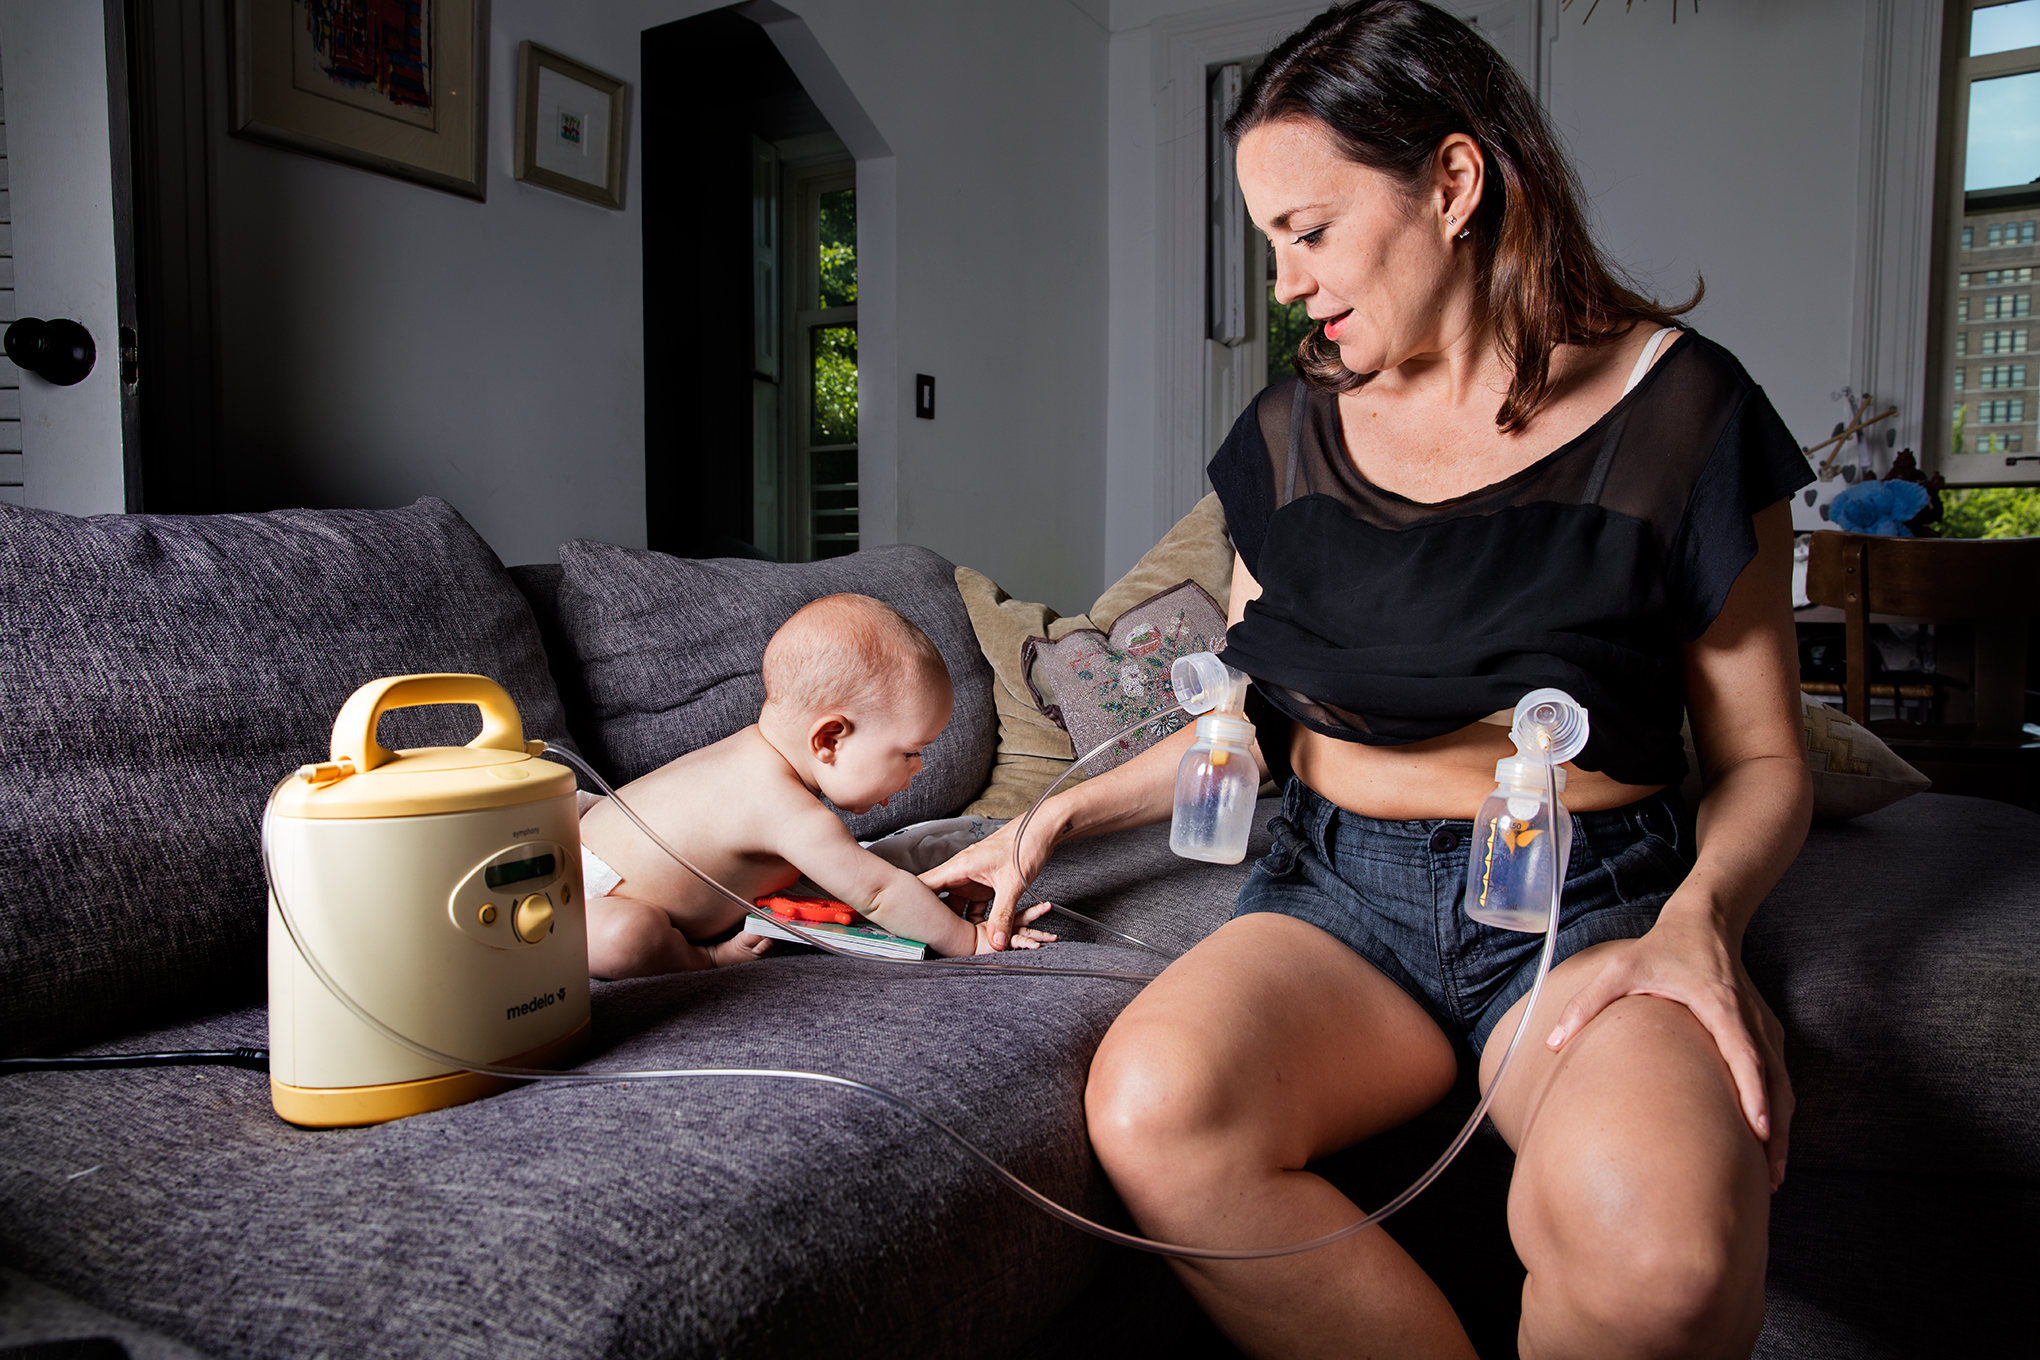 Nichols pumps her breast milk, which she supplements with donor milk and formula. (Elinor Carucci for TIME)